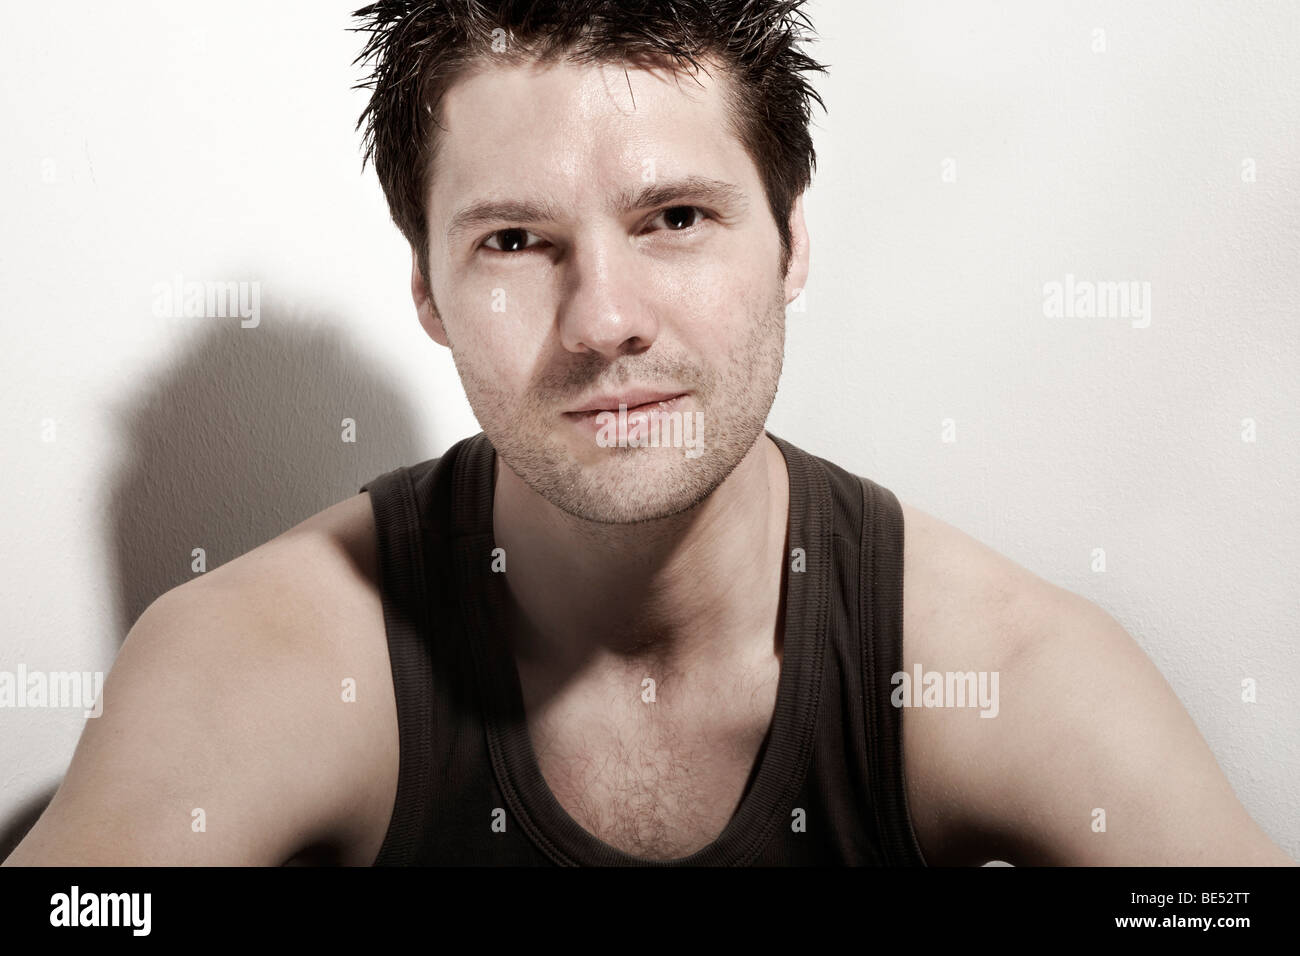 Dark-haired young man, portrait Stock Photo